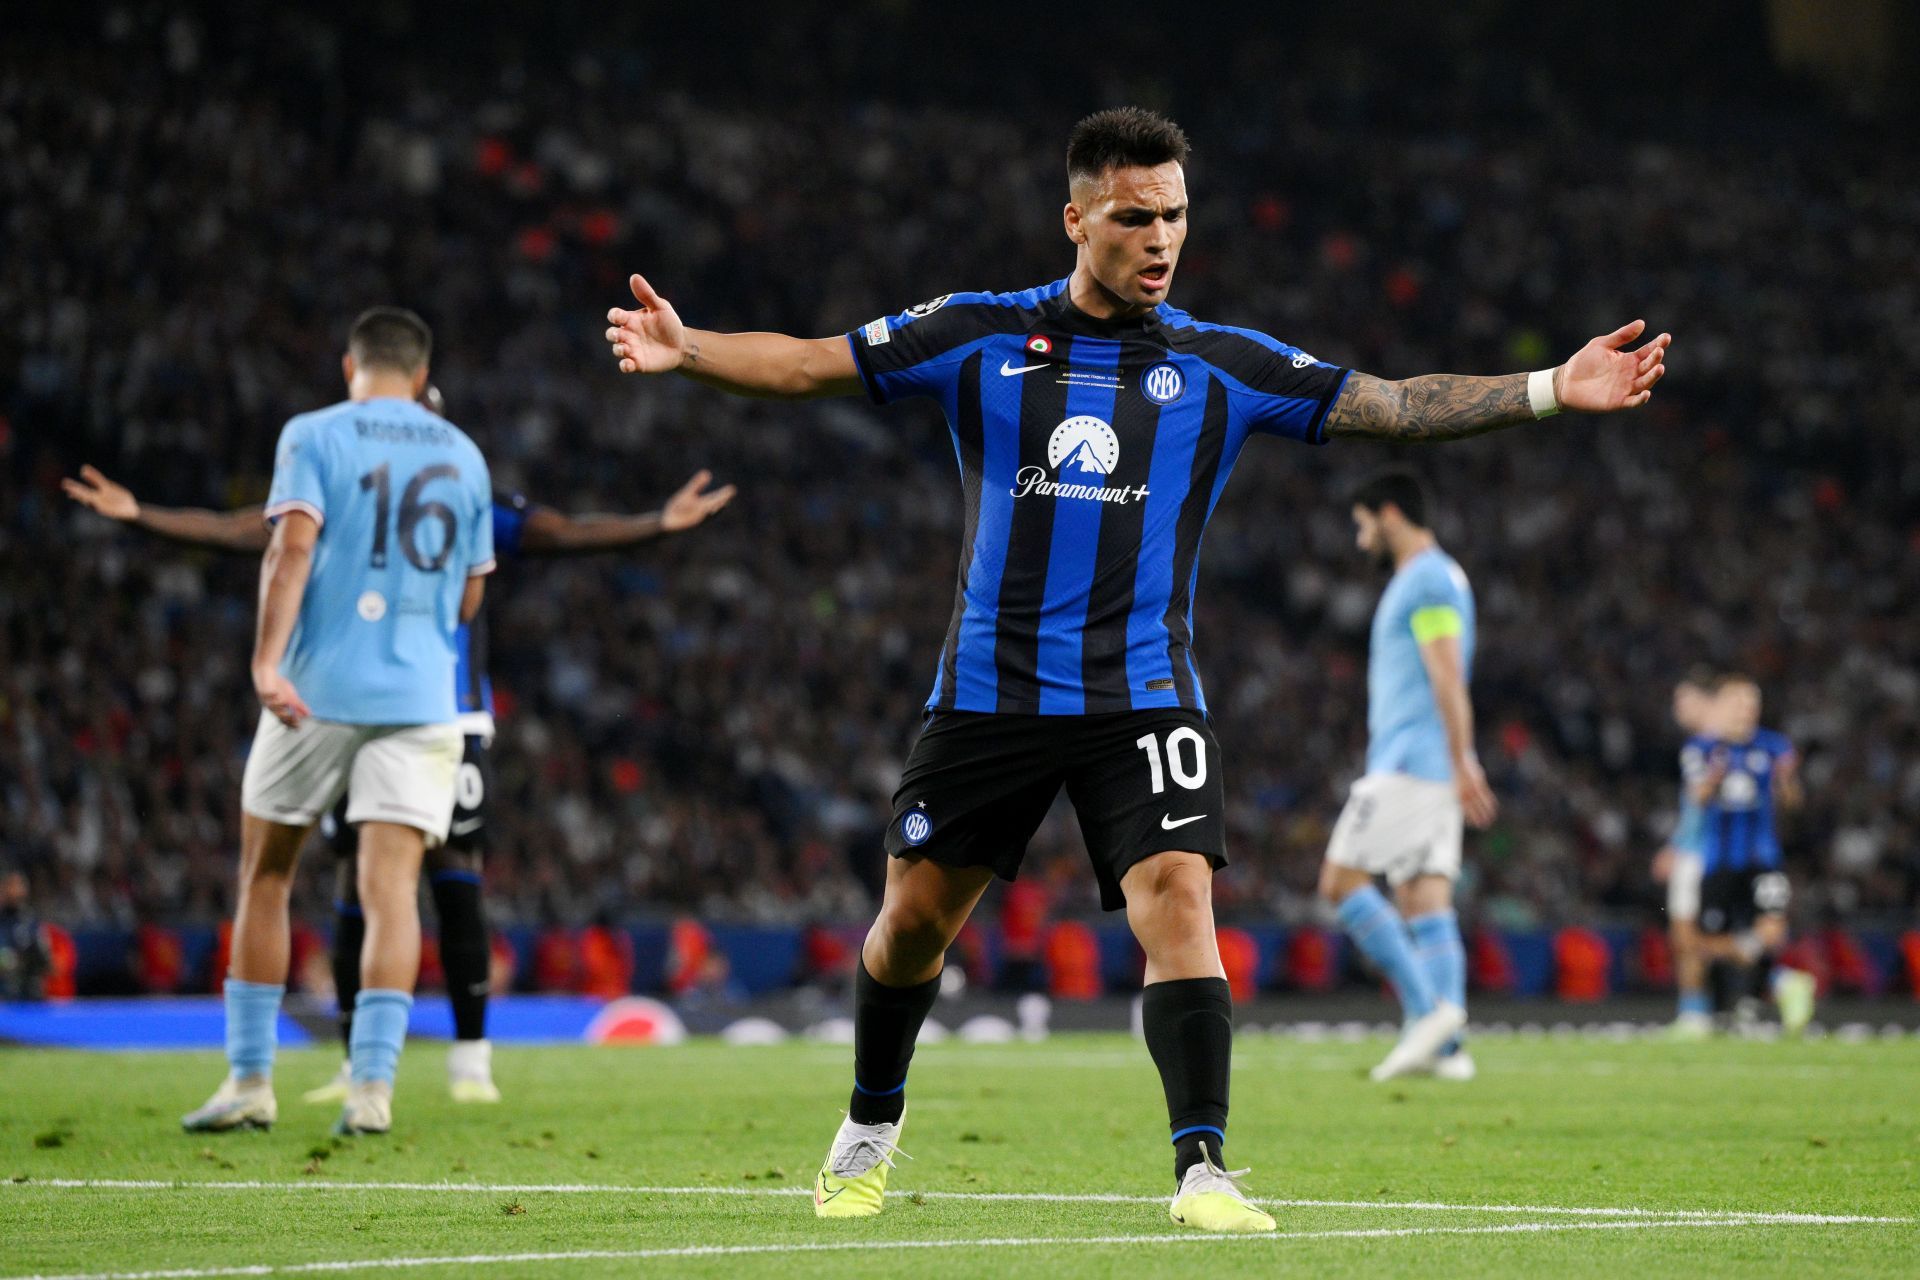 Lautaro Martinez has admirers at Old Trafford.